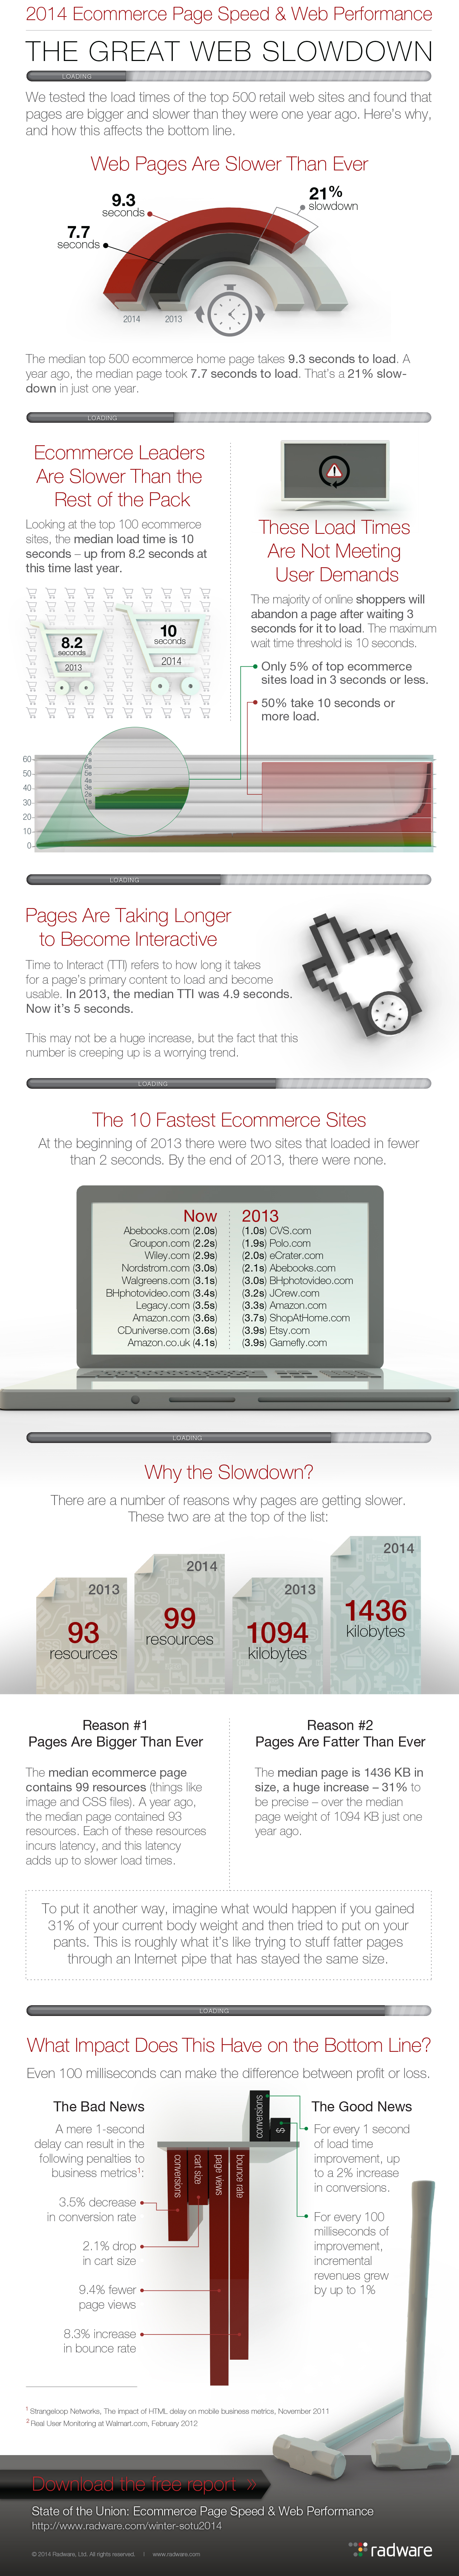 2013-2014 Winter State of the Union: Ecommerce Page Speed & Web Performance Infographic